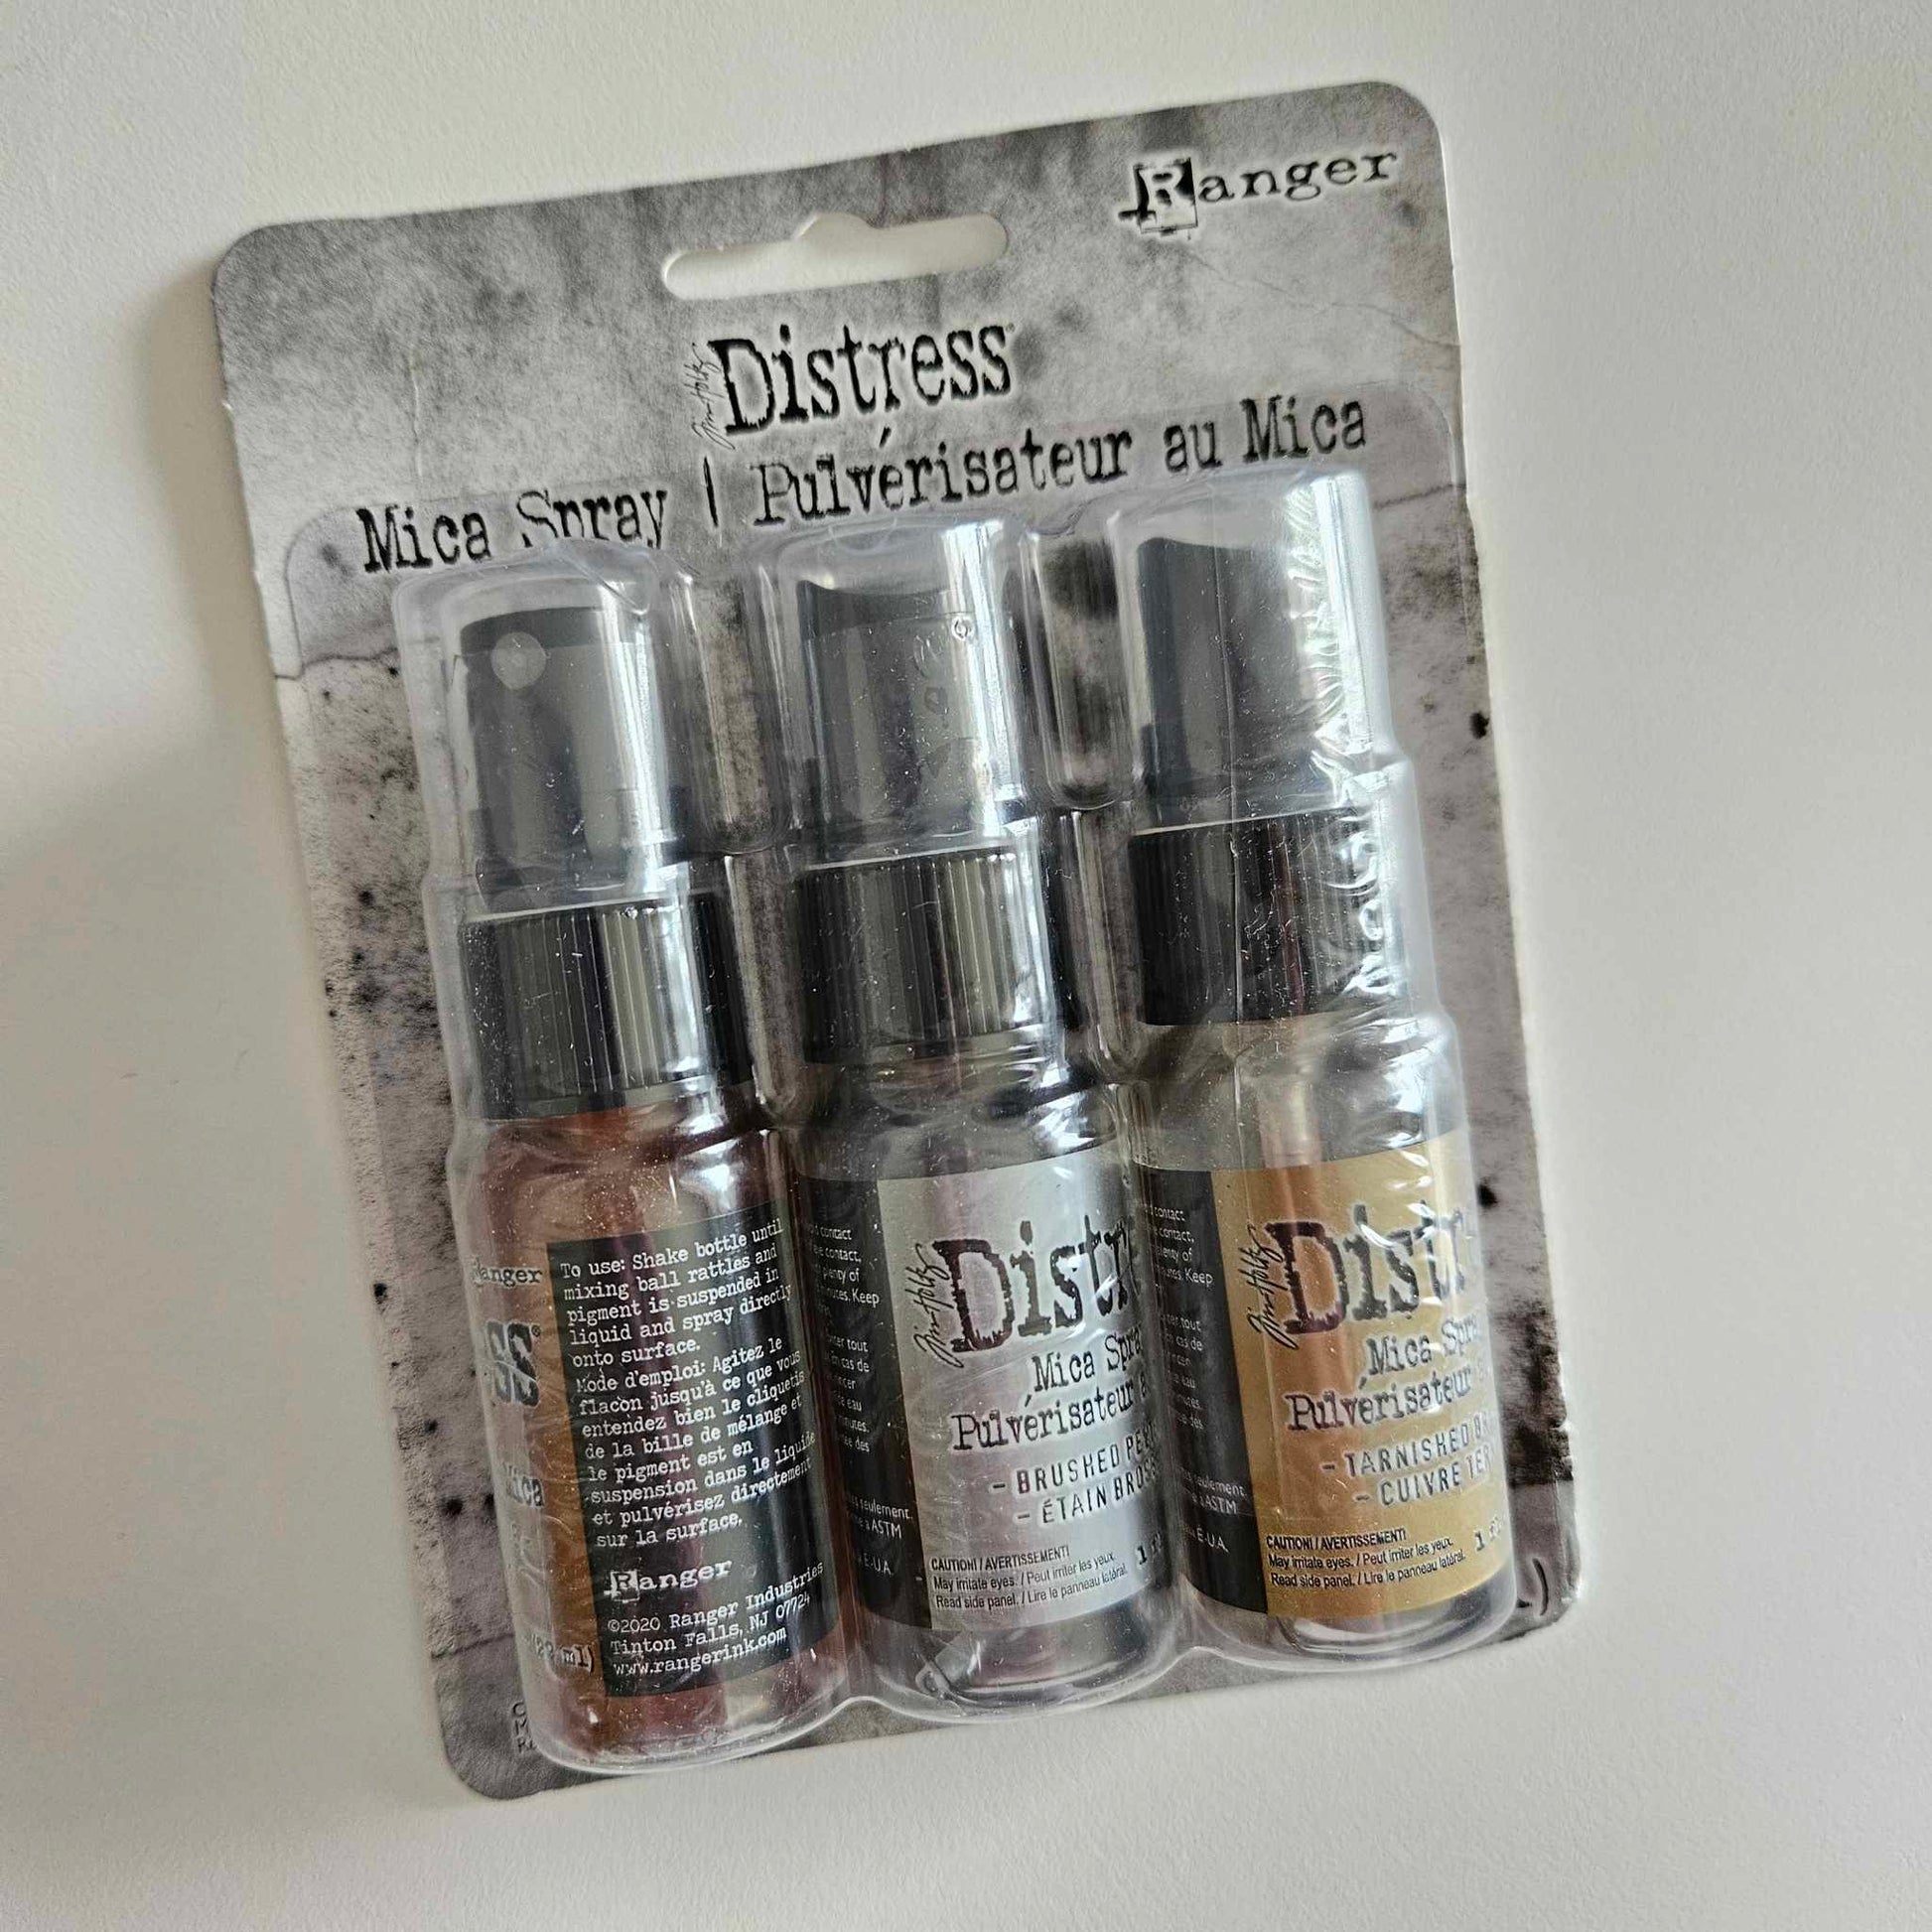 Distress Mica Sprays 3 Pack - Tim Holtz Ranger - Aussie Paper Crafting - The Turtle Journal - Set of Three Distress Mixed Media  Sprays Sparkly Shimmer - Aussie paper Crafting Journaling Supplies